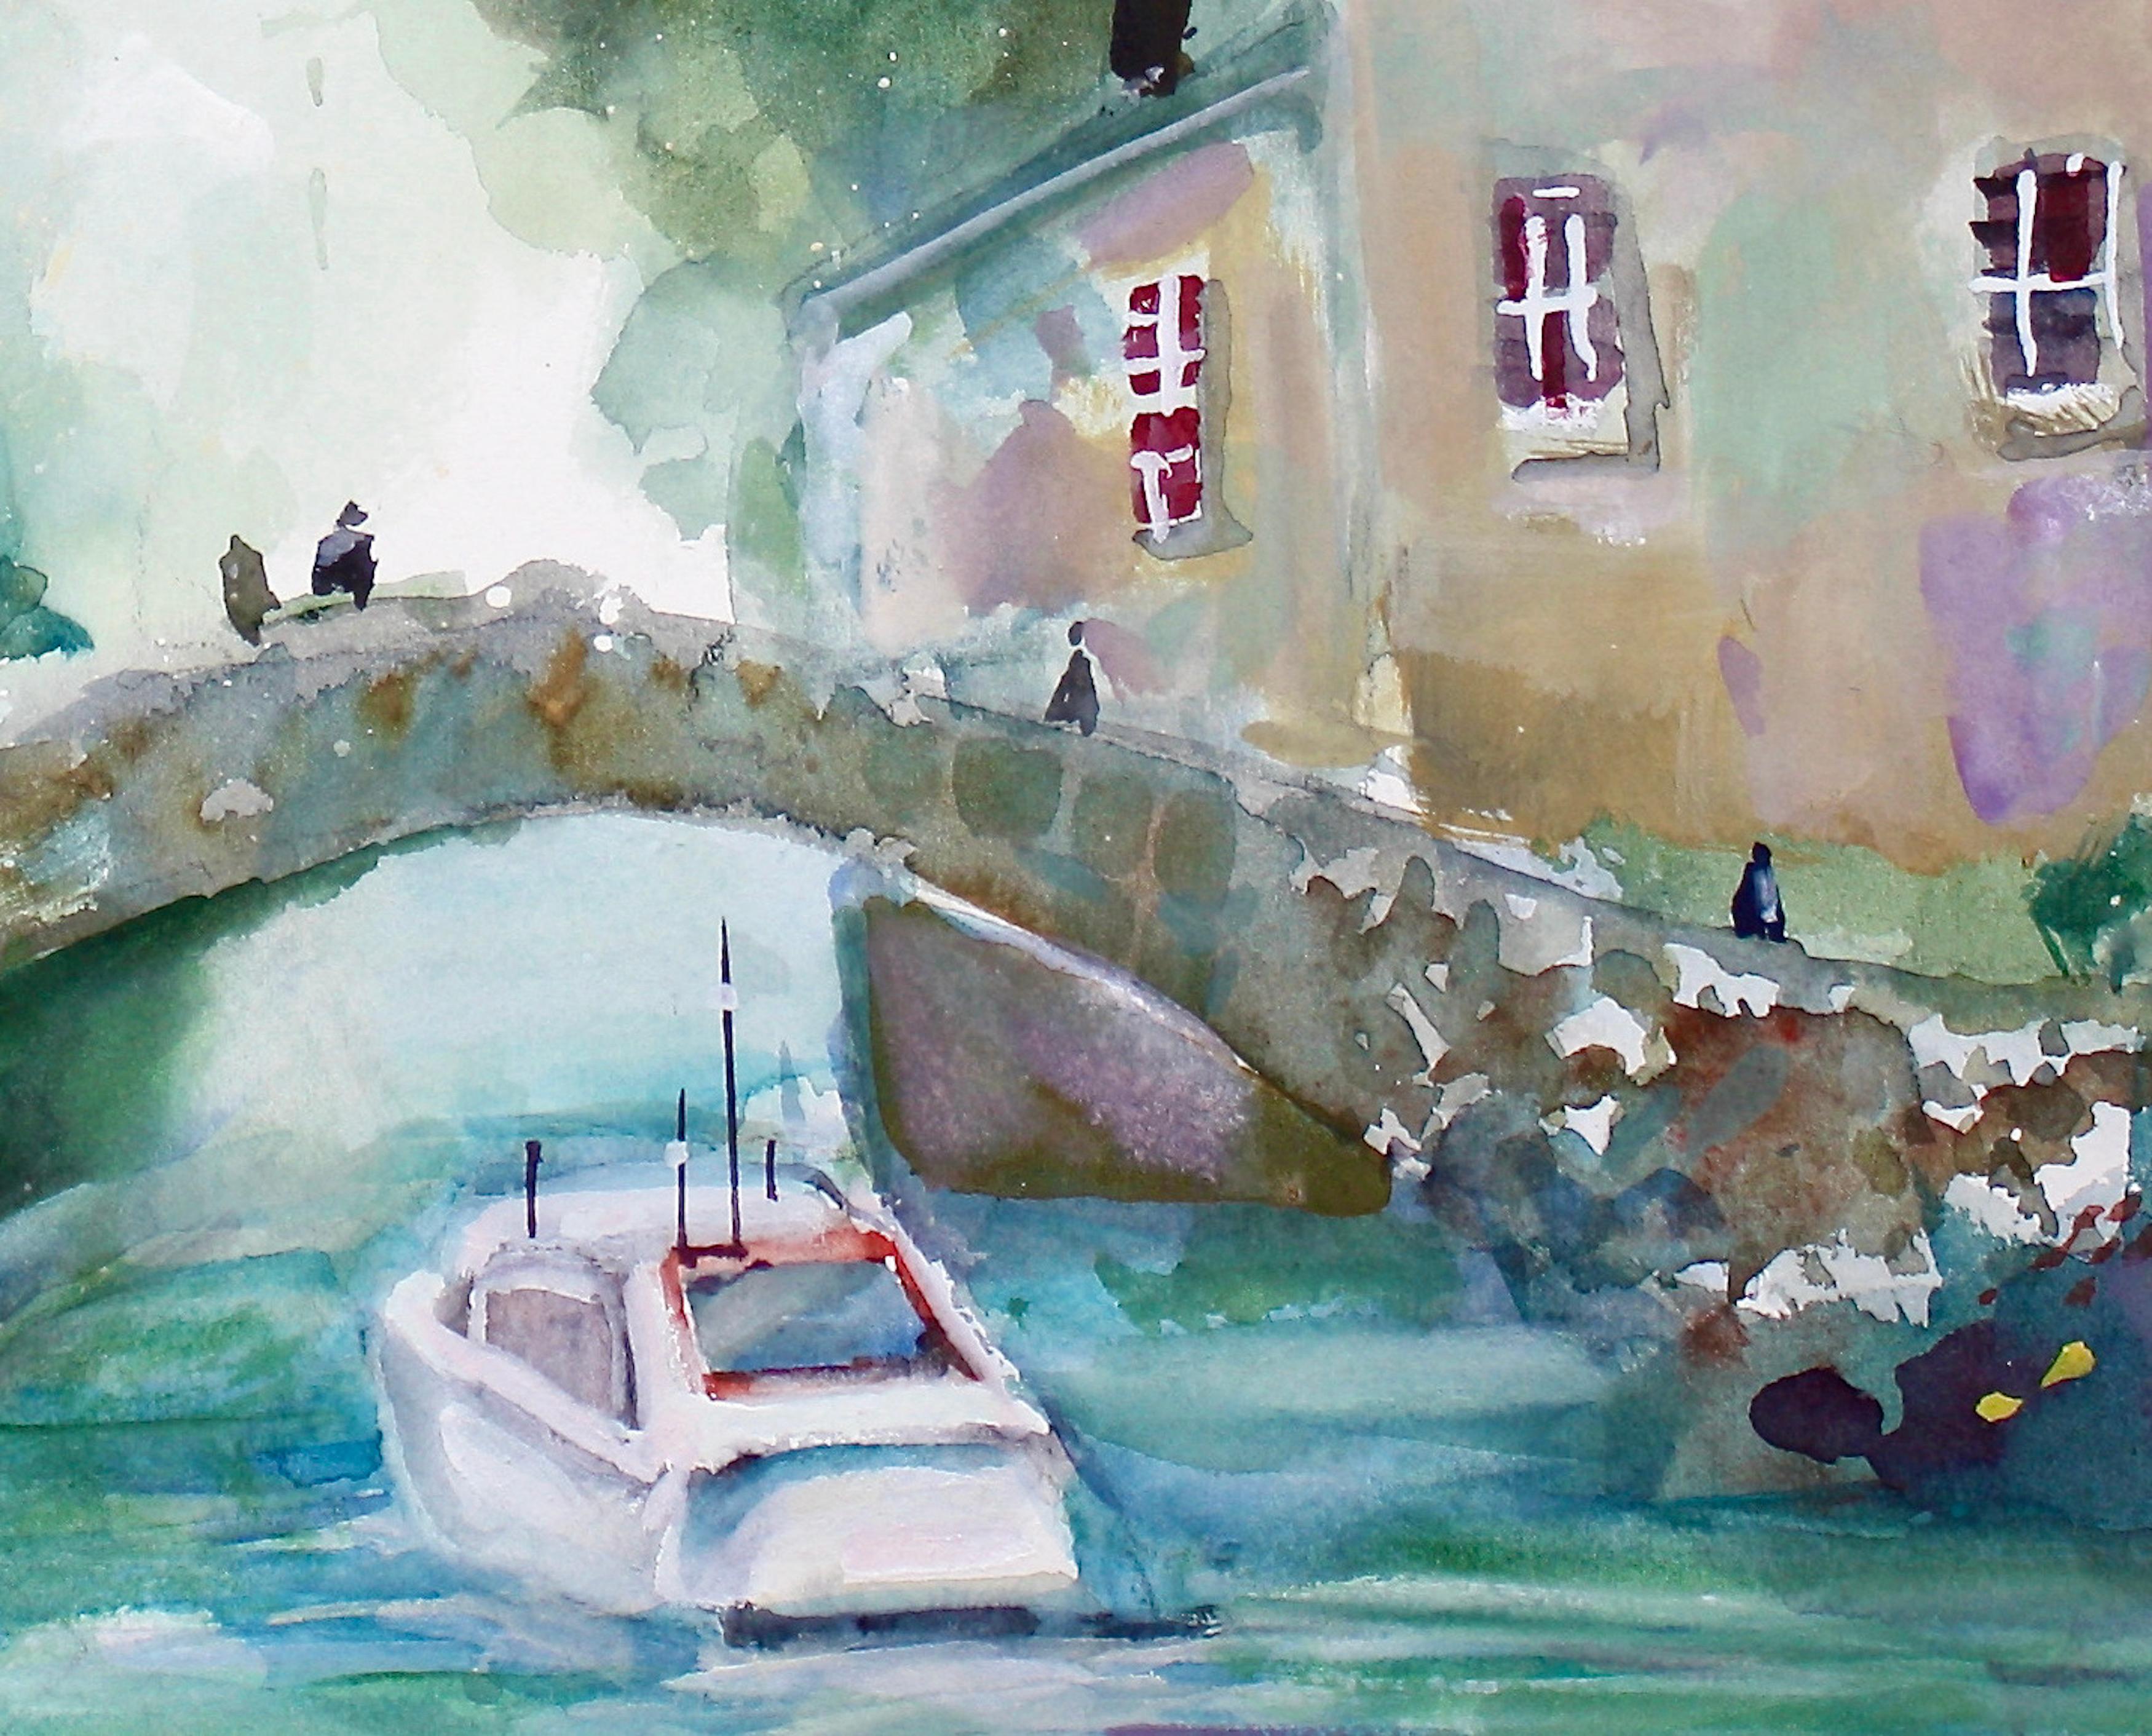 <p>Artist Comments<br>Artist Joe Giuffrida displays a view of the beautiful villas at Lake Como. He creates transparency in the foliage, lake, and sky by mixing gouache and watercolor. Joe then applies splattering techniques for points of interest.